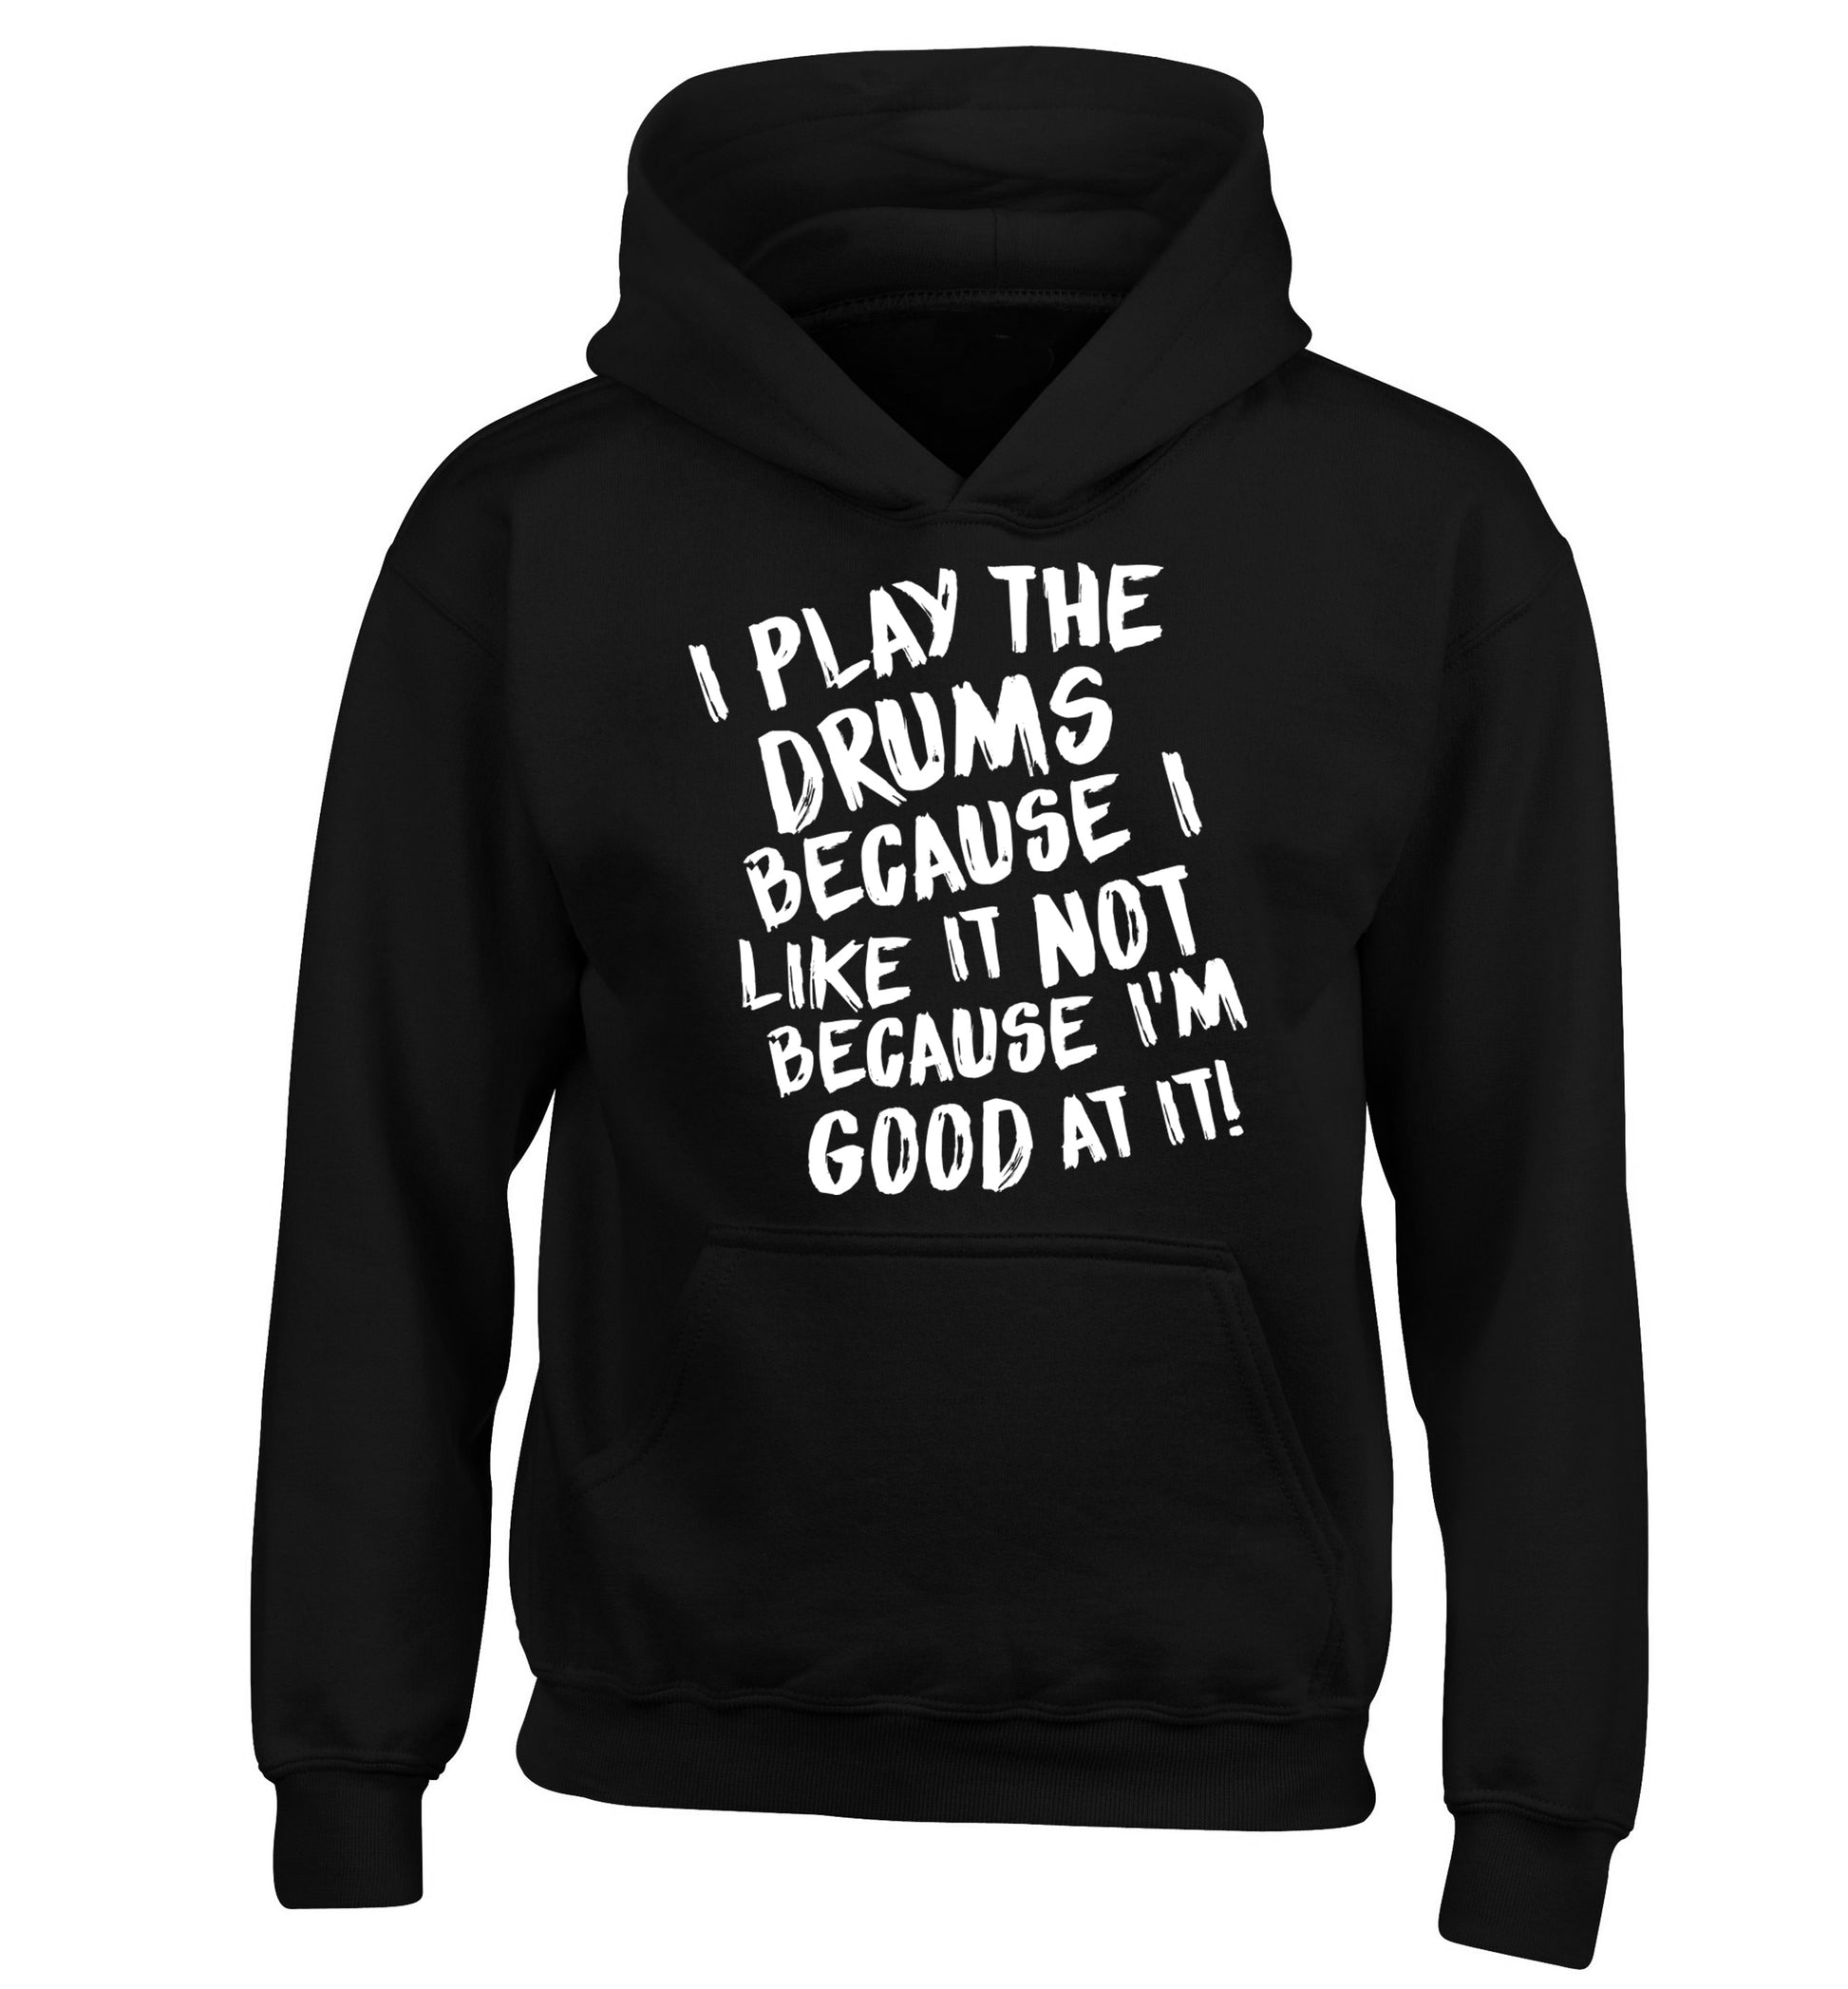 I play the drums because I like it not because I'm good at it children's black hoodie 12-14 Years